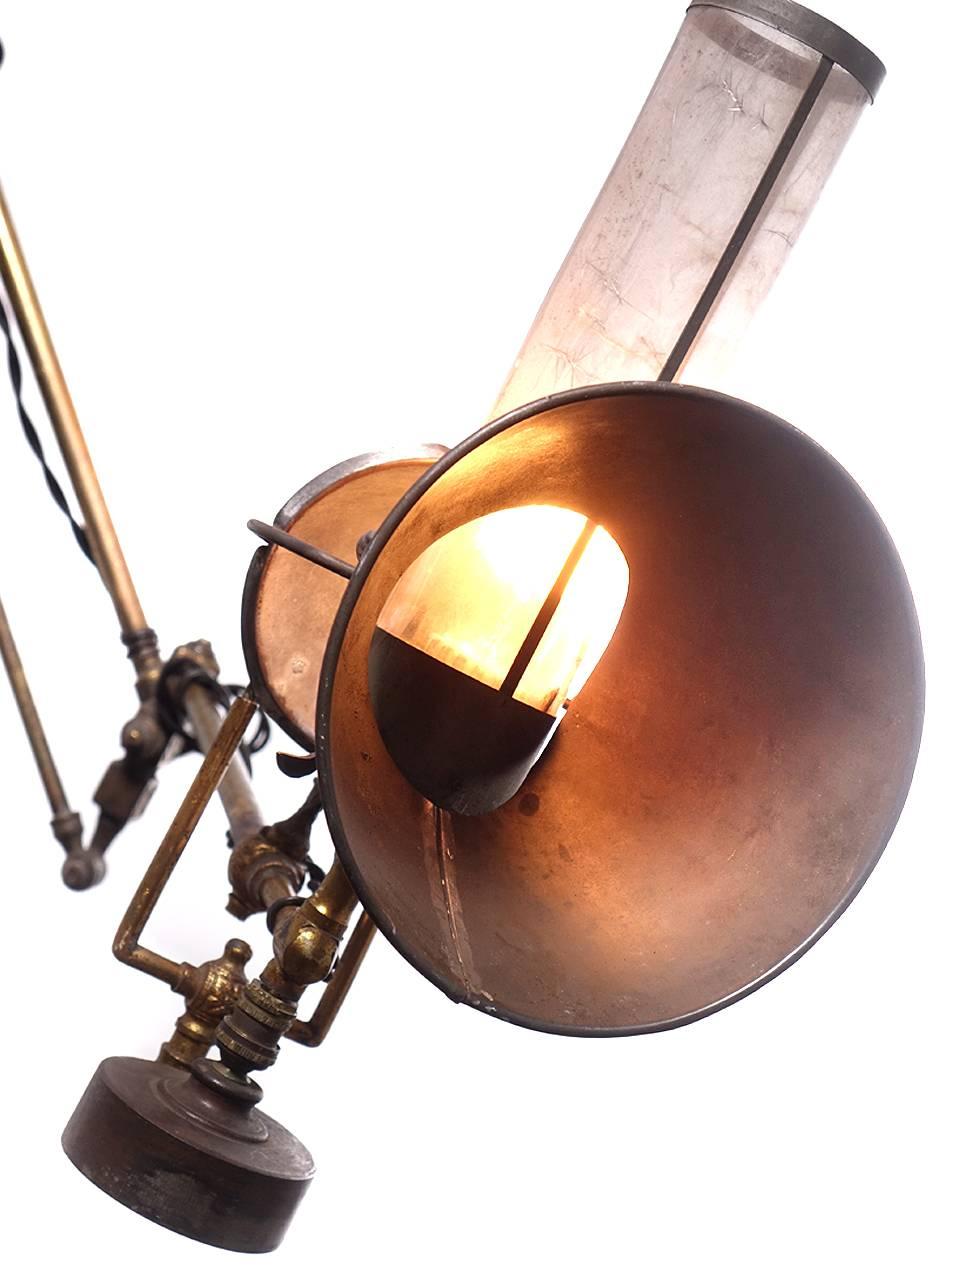 This lamp is so unique and very delicate. The original mica chimney and funnel shade is still intact. I'm guessing that this was a medical or scientific lamp from the mid-late 1800s. Sometimes this type of lamp was used to a brighten the view on a